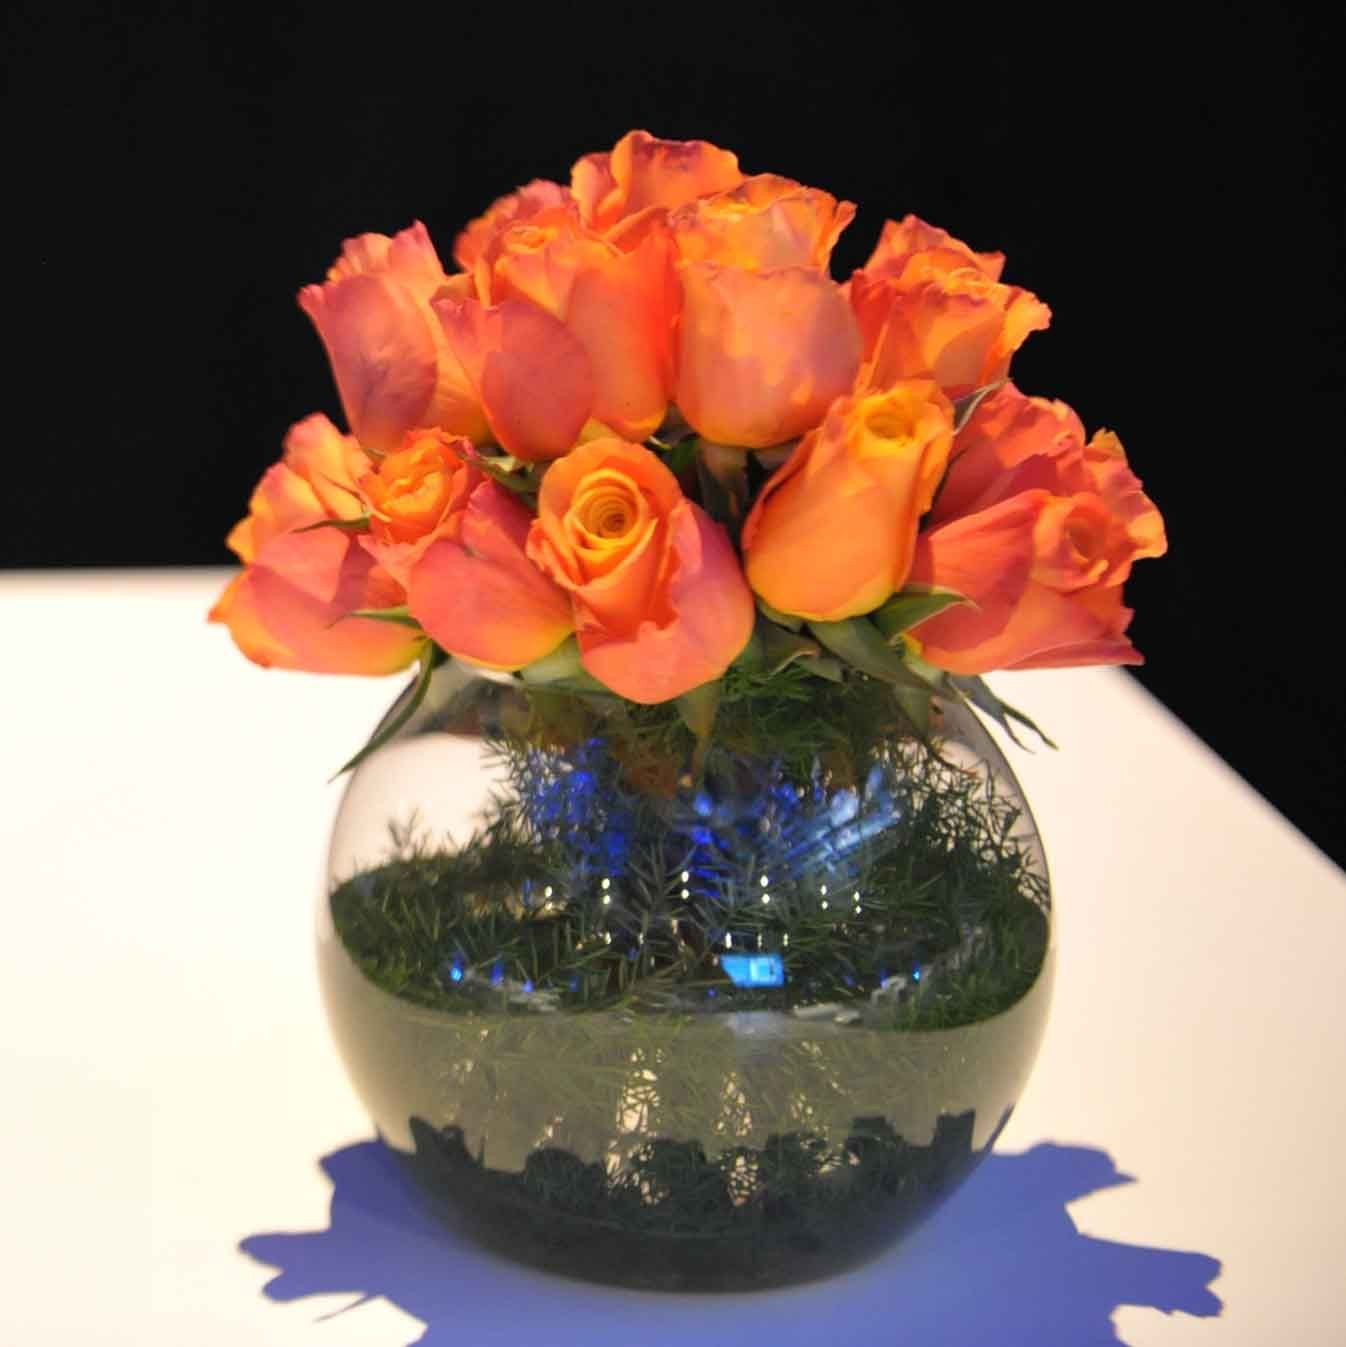 25 attractive Green and Gold Glass Vase 2024 free download green and gold glass vase of orange glass vase image 8 od orange rose foliage lined gold fish pertaining to orange glass vase image 8 od orange rose foliage lined gold fish bowl of orange gl